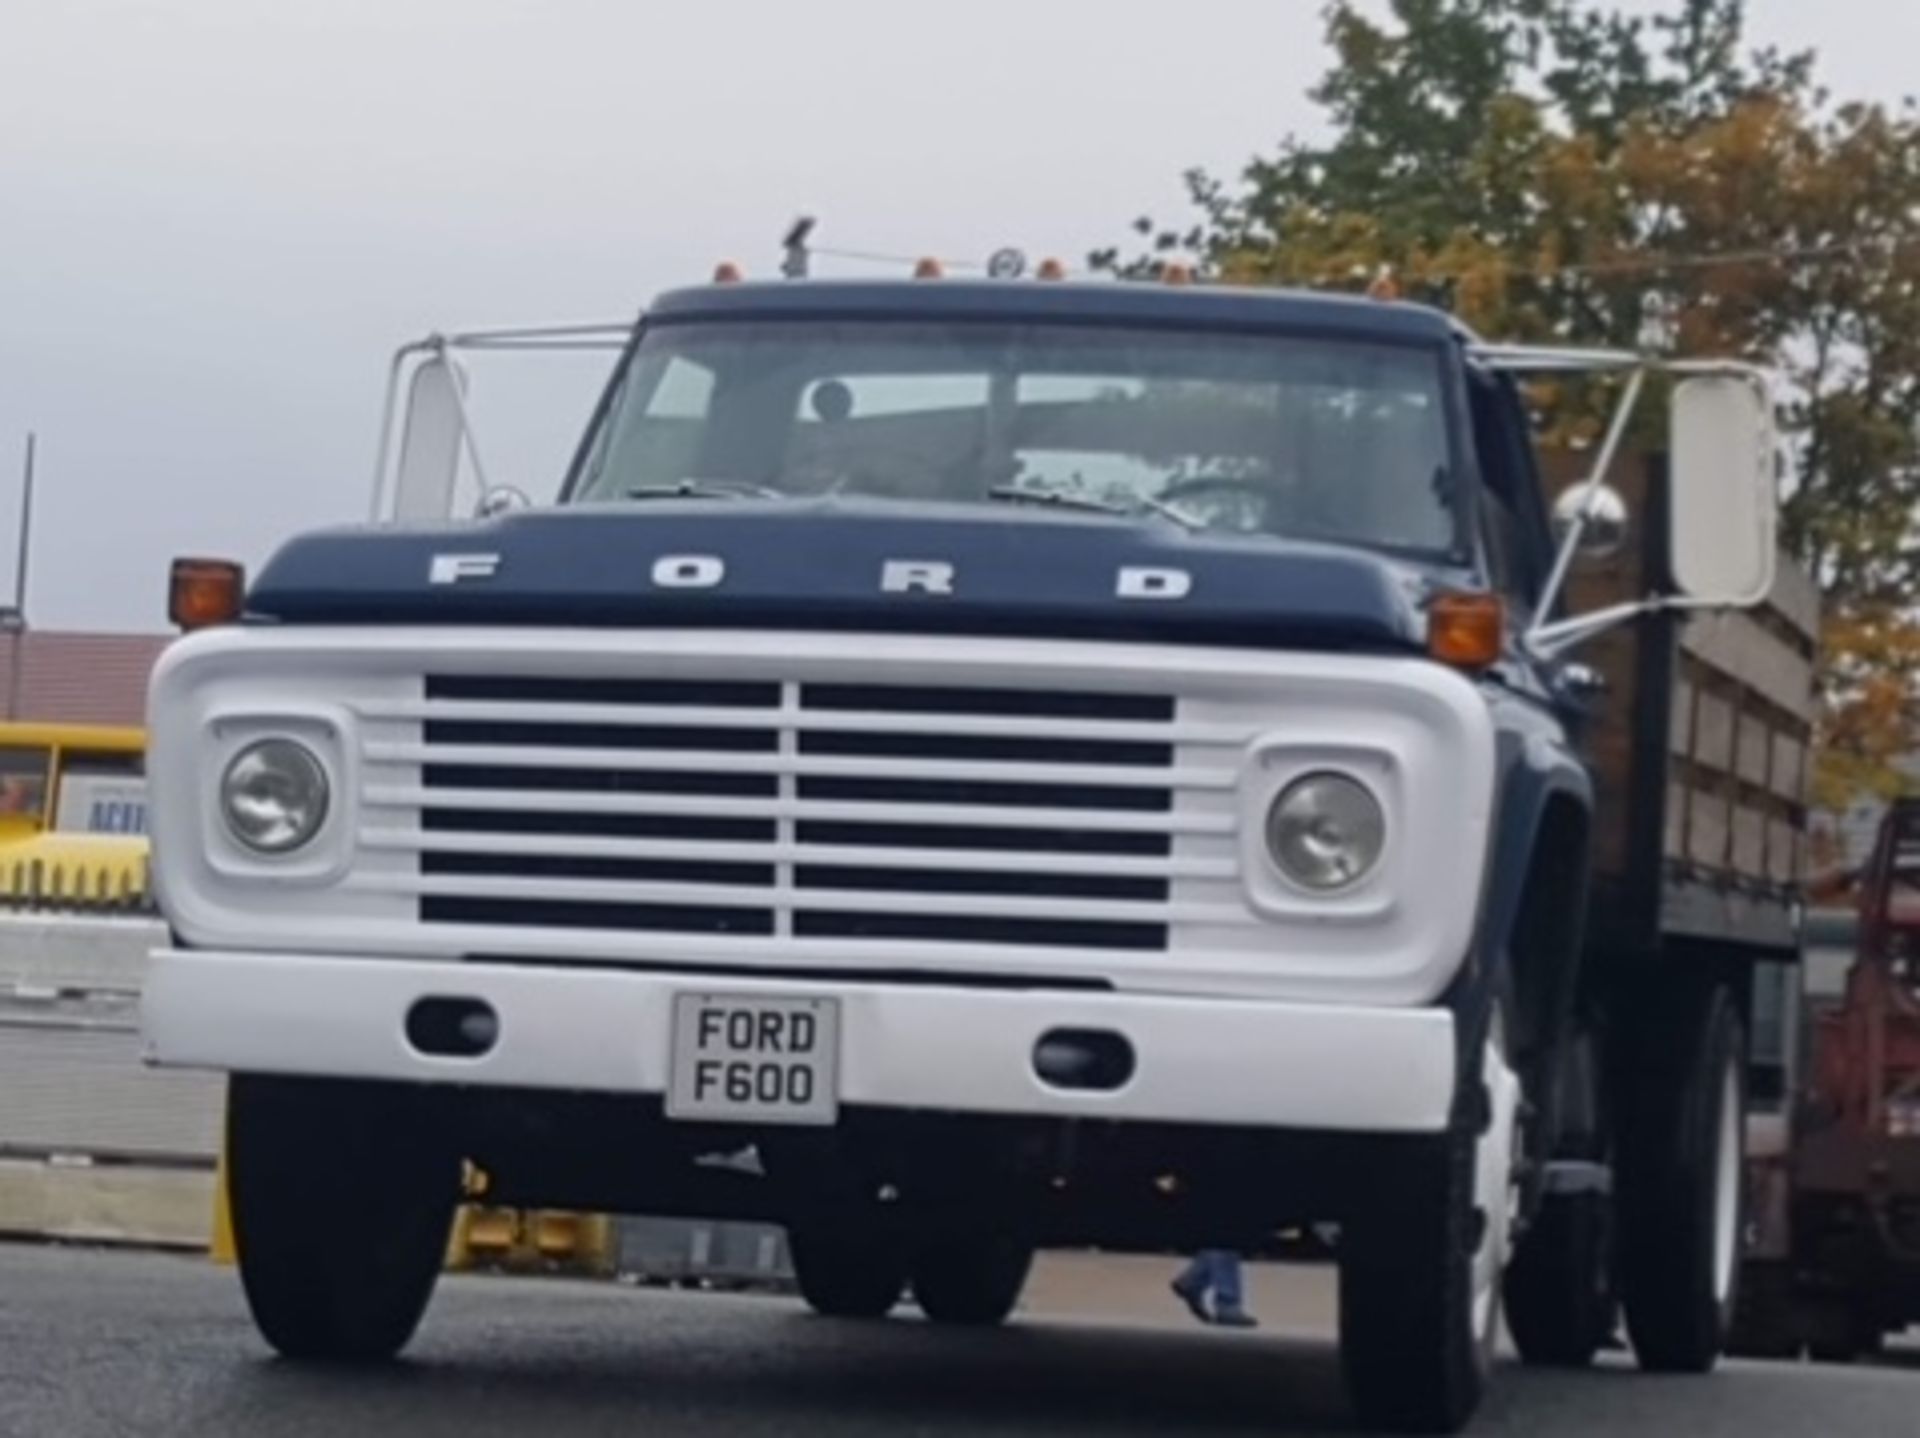 1975 Ford F600 Pick-Up Truck LHD - Image 3 of 12